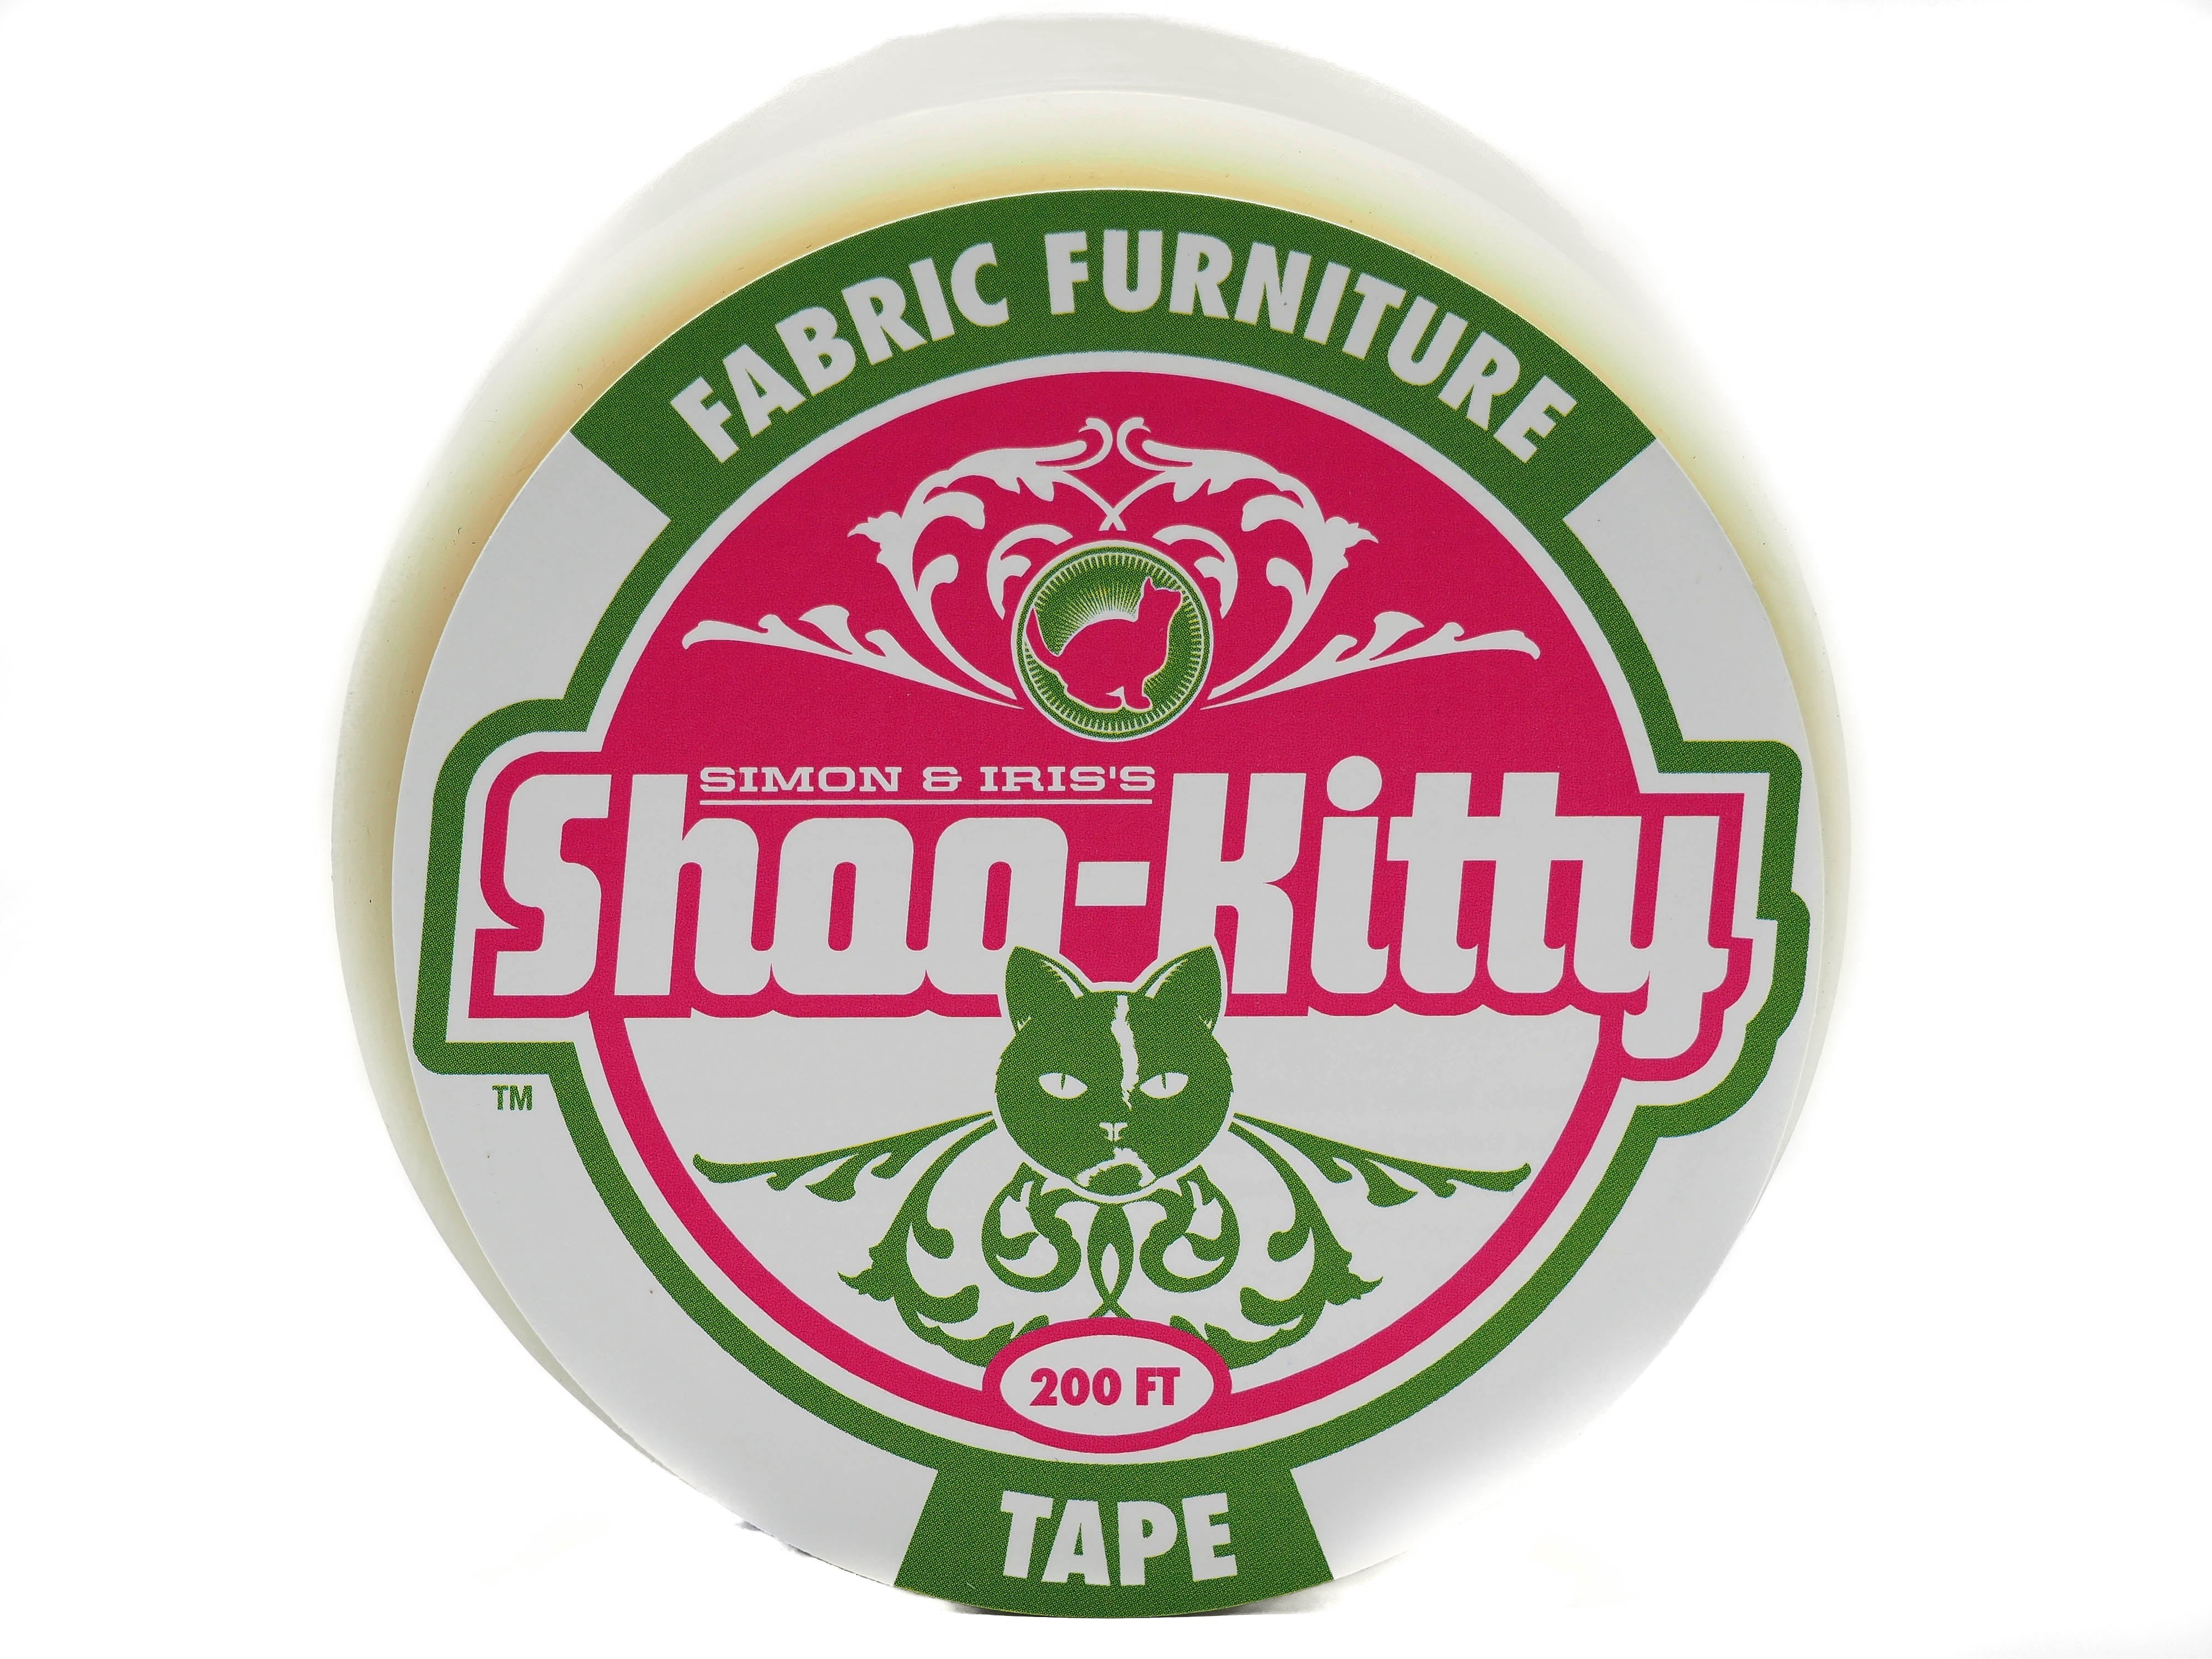 Fabric upholstery furniture tape  Cat scratch prevention tape - Shoo-Kitty  –